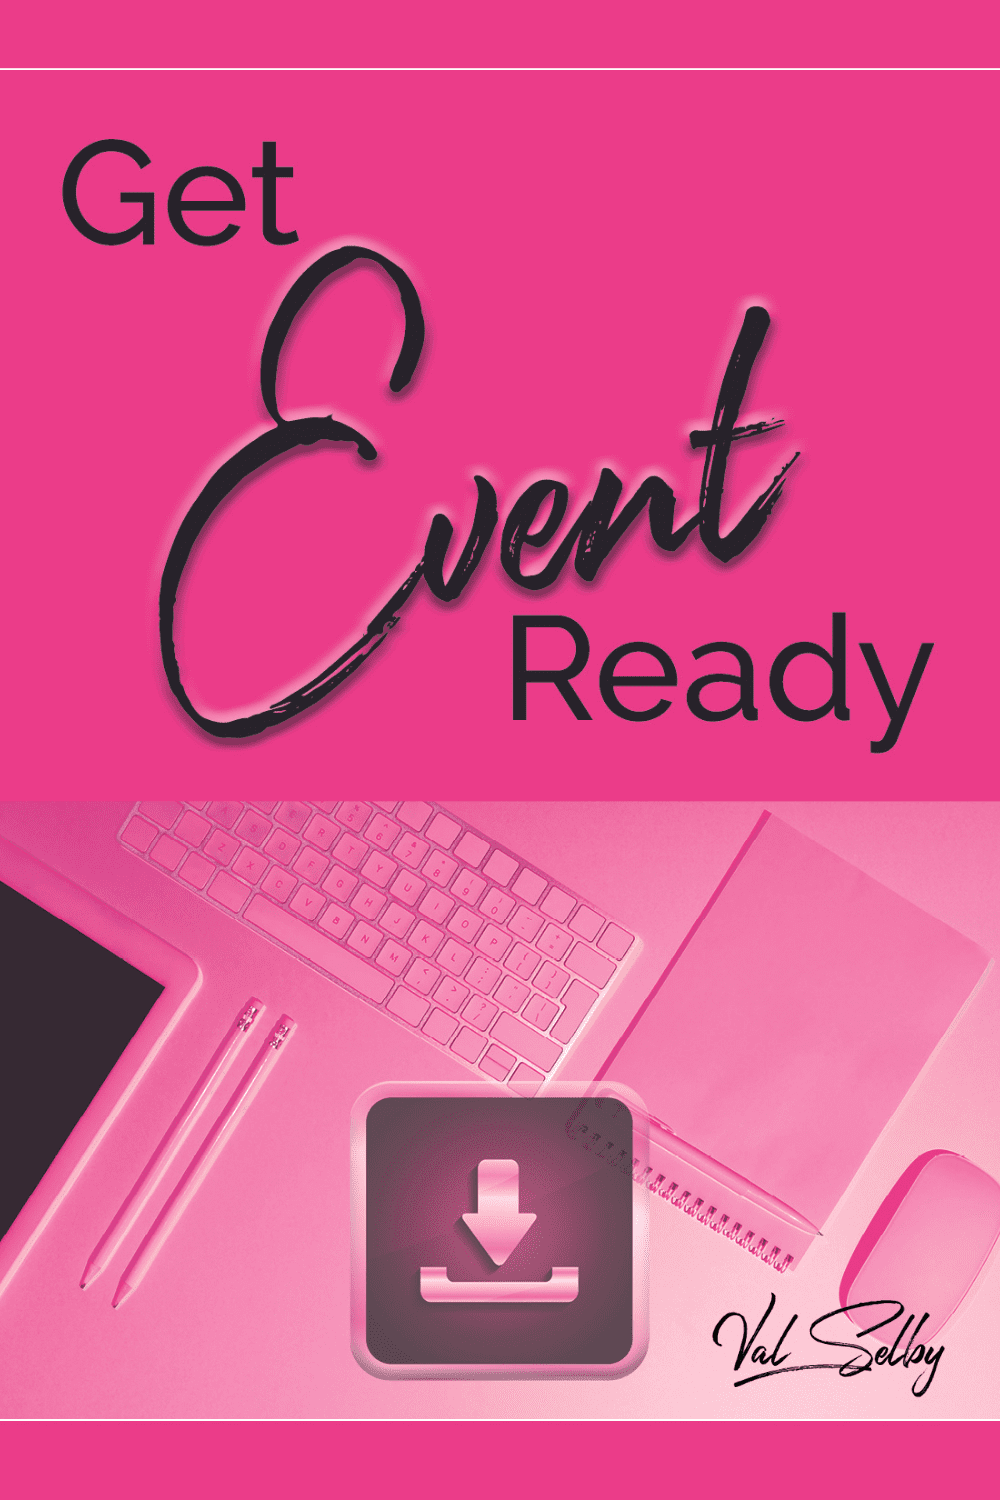 get event ready